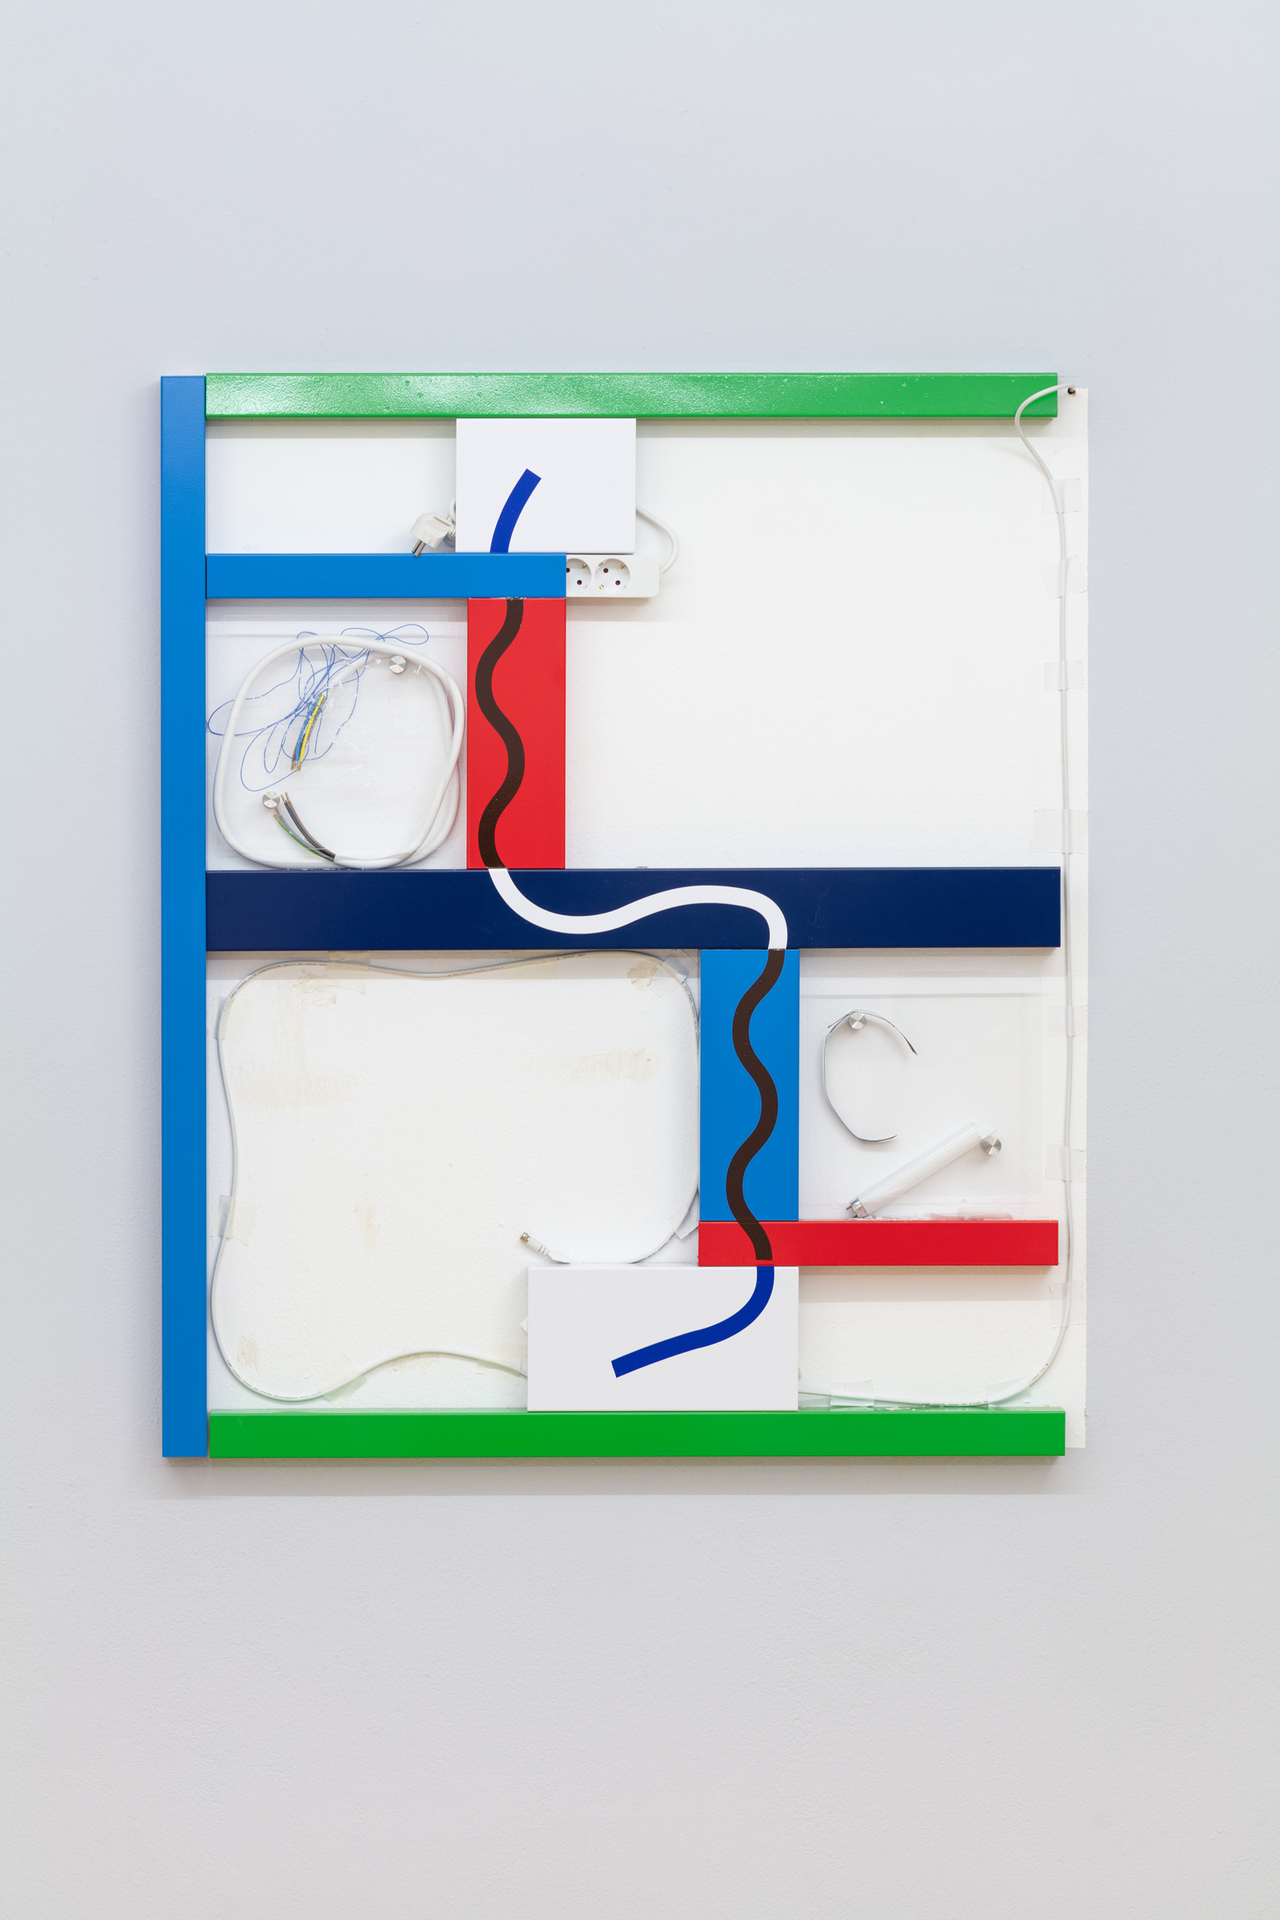 Hilla Toony Navok, Front view (Neon), 2021, Coated metal, synthetic material, plug, cables, neon tube, paper, nail brush, 120 x 105 x 5 cm